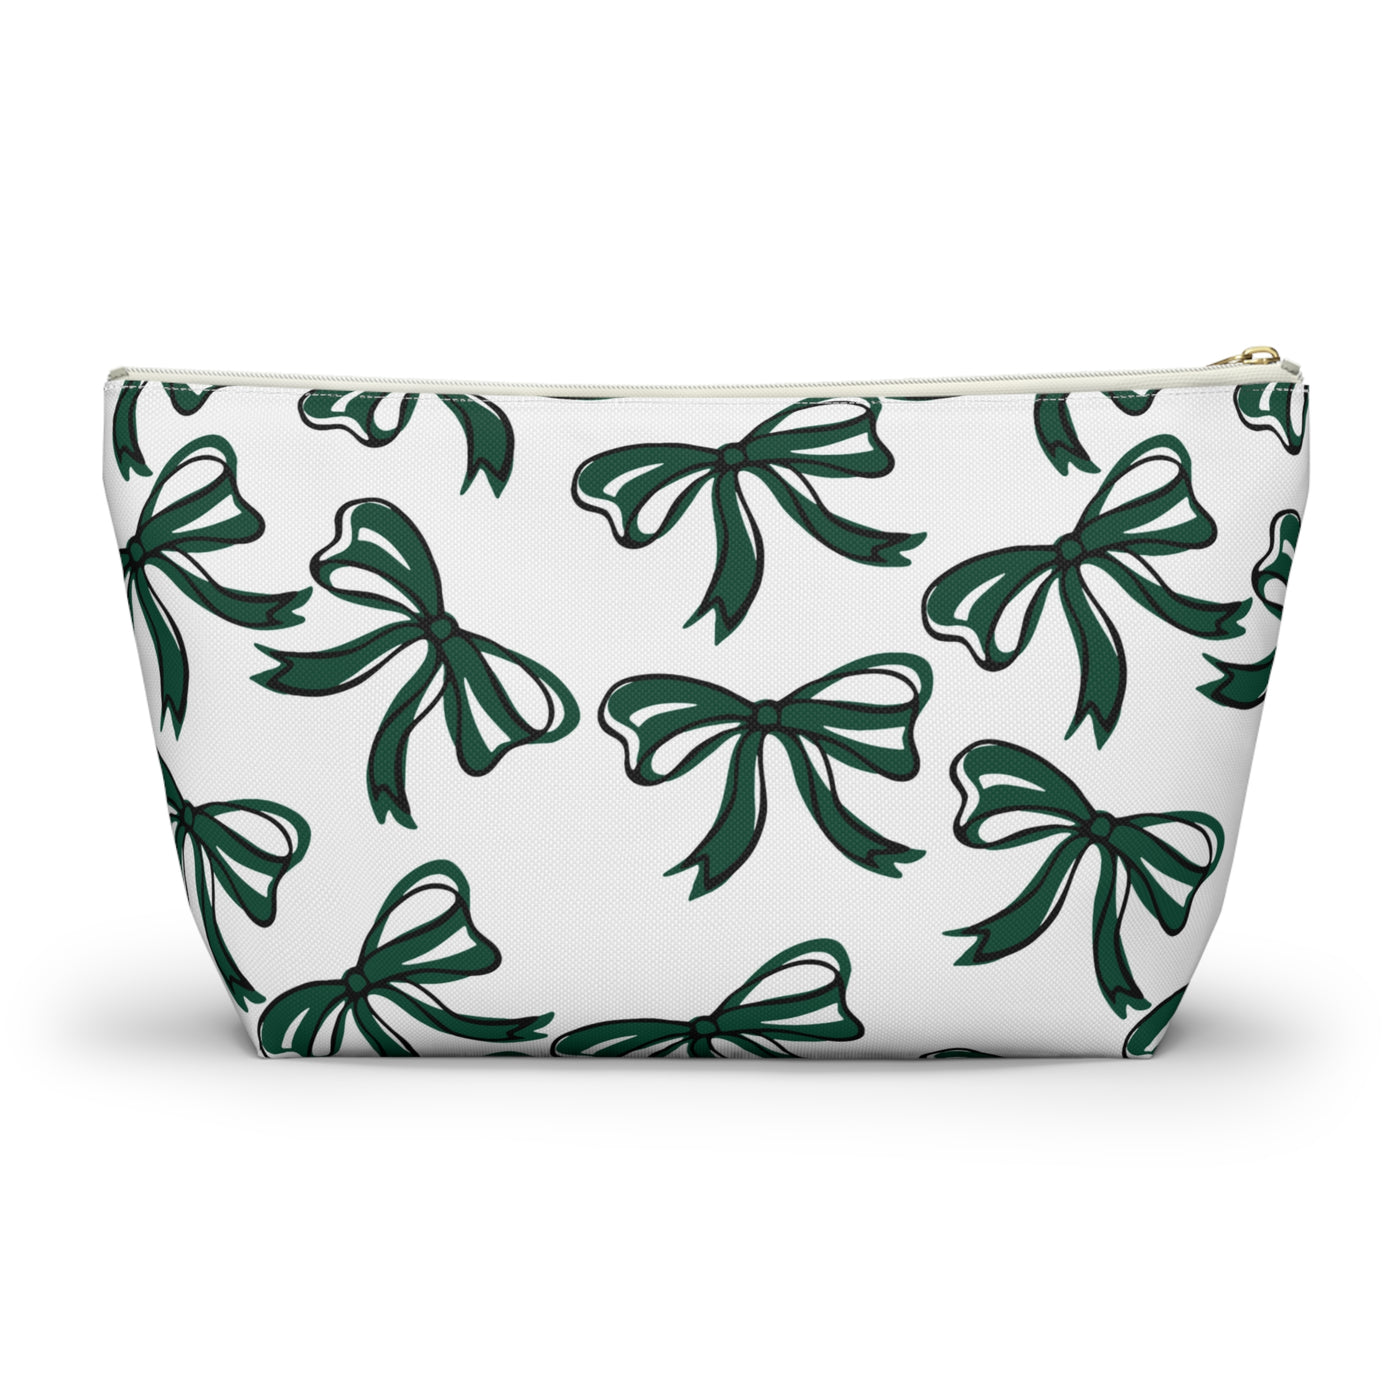 Trendy Bow Makeup Bag - Graduation Gift, Bed Party Gift, Acceptance Gift, College Gift, Michigan State, BING, Green and white, Spartans